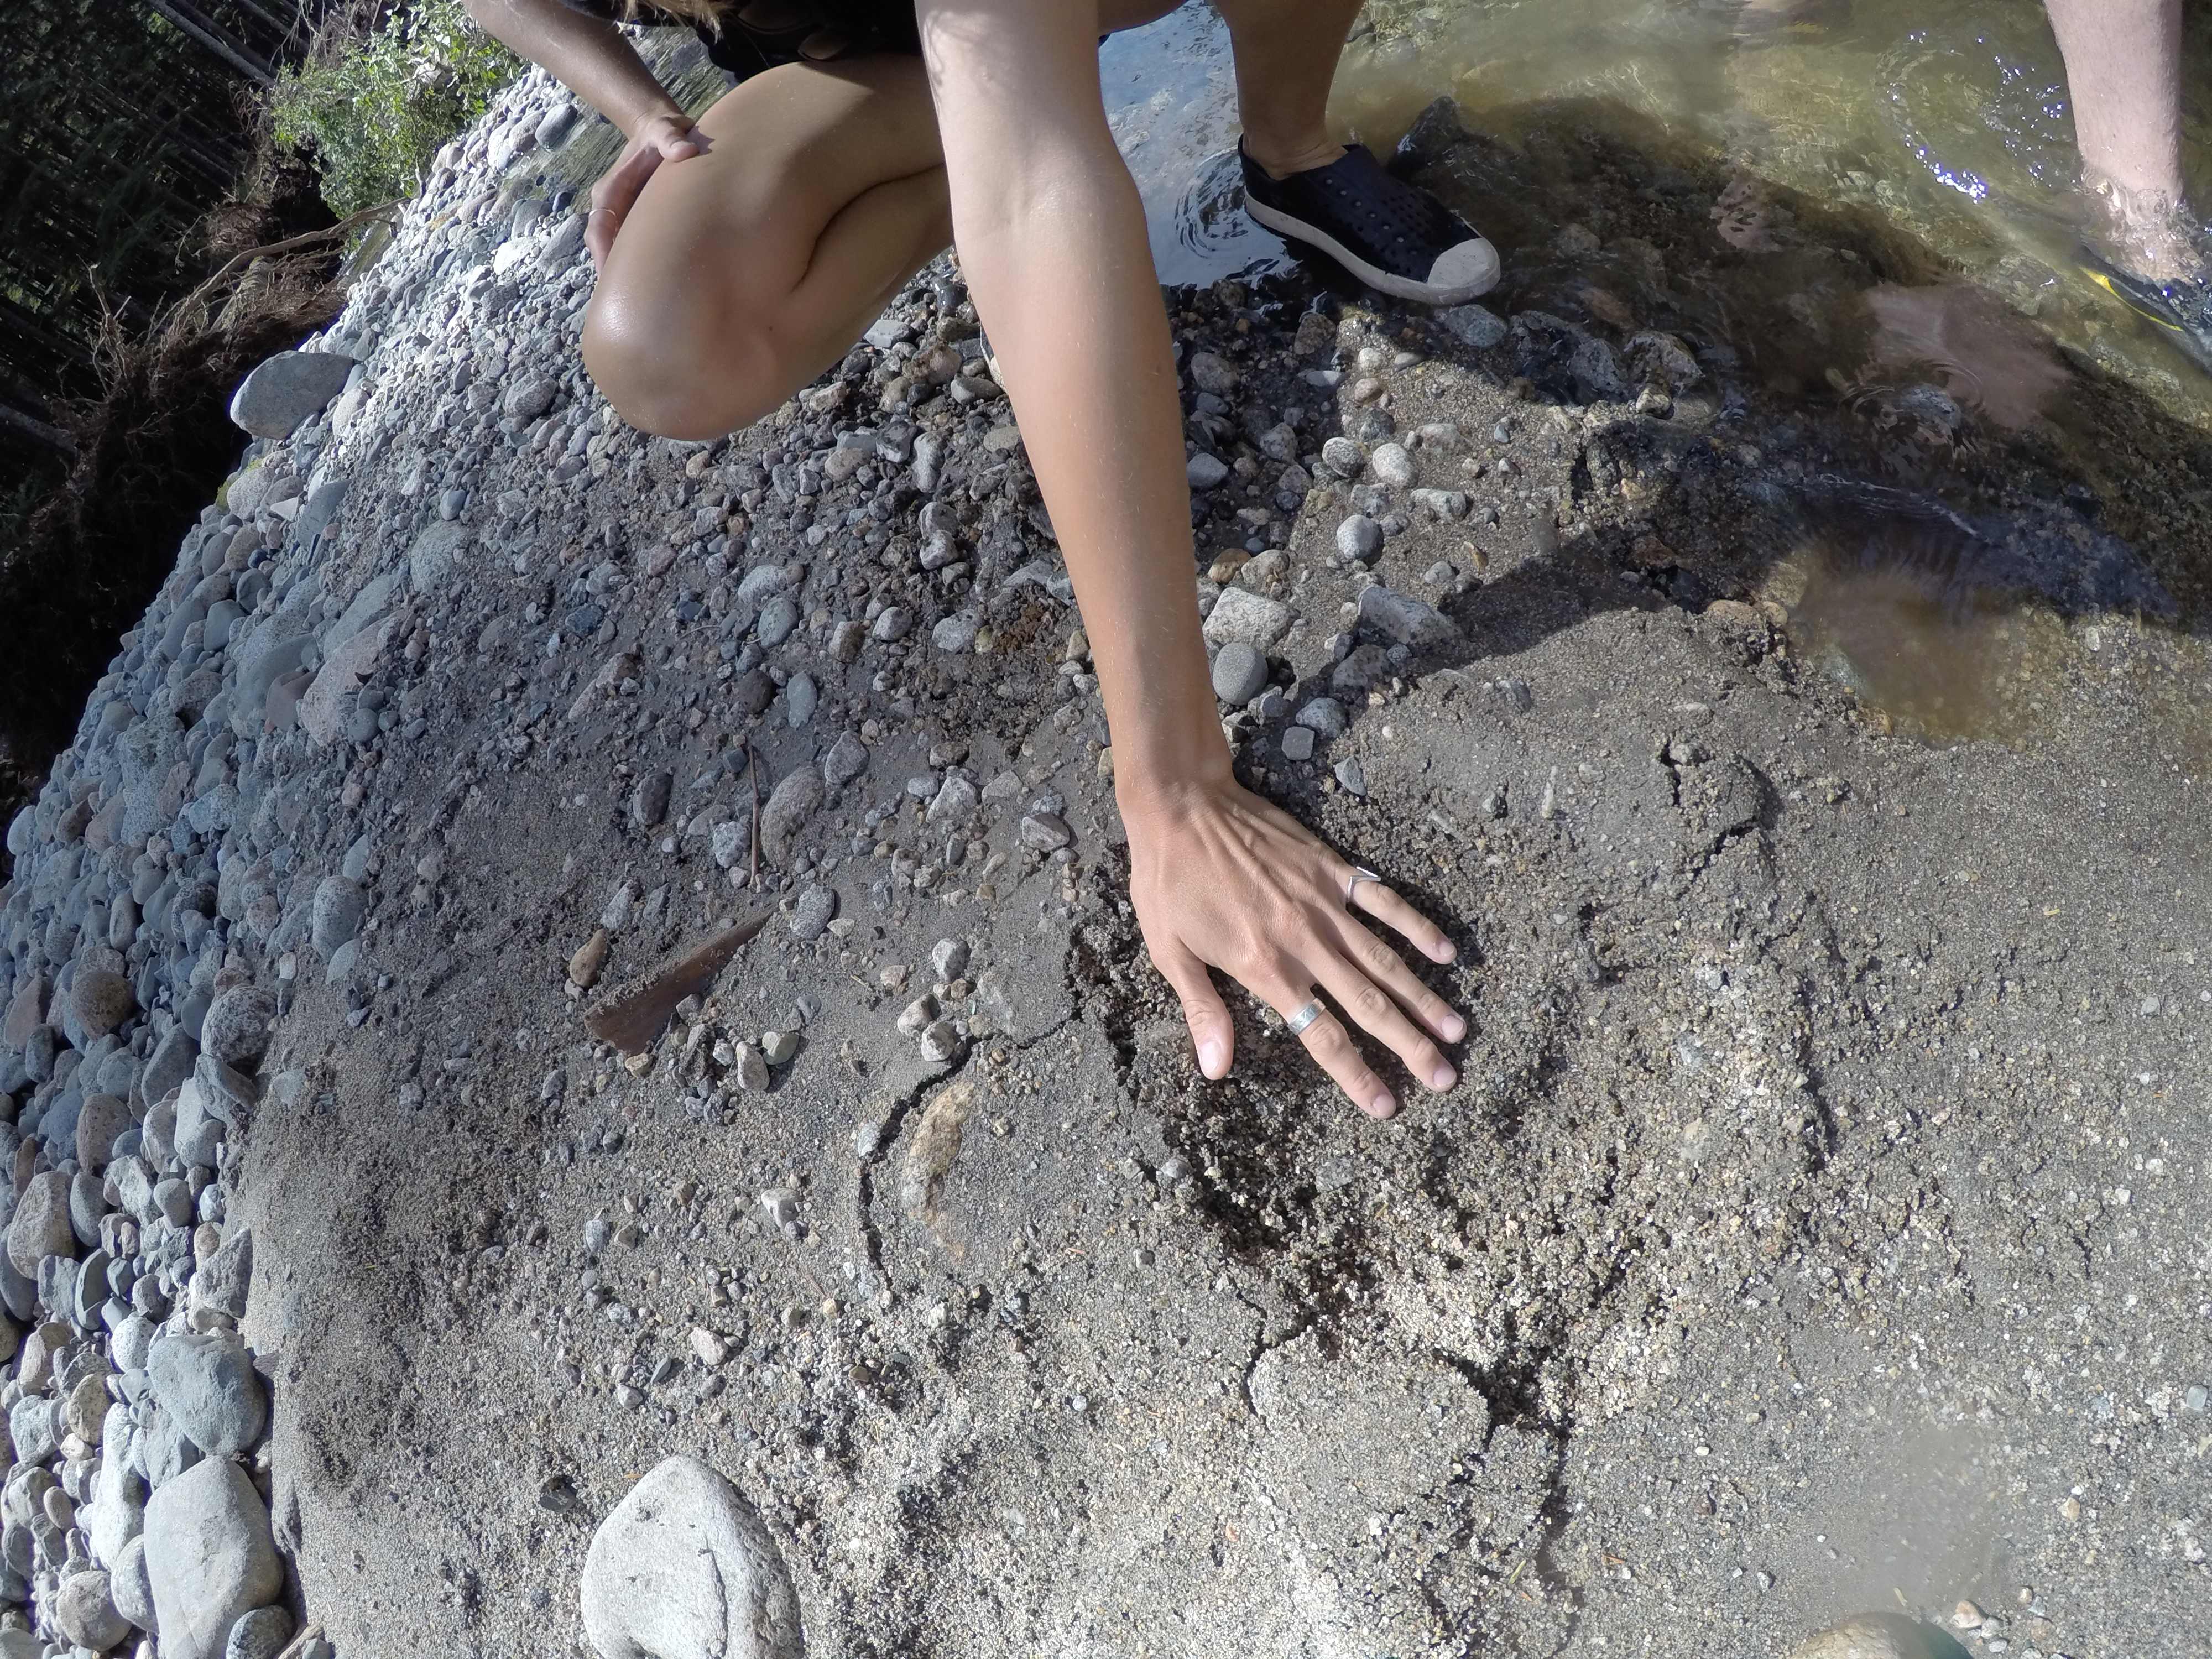 Oh look! A cute, fresh, massively-humongous grizzly paw print. Let's keep exploring! (Duh..)